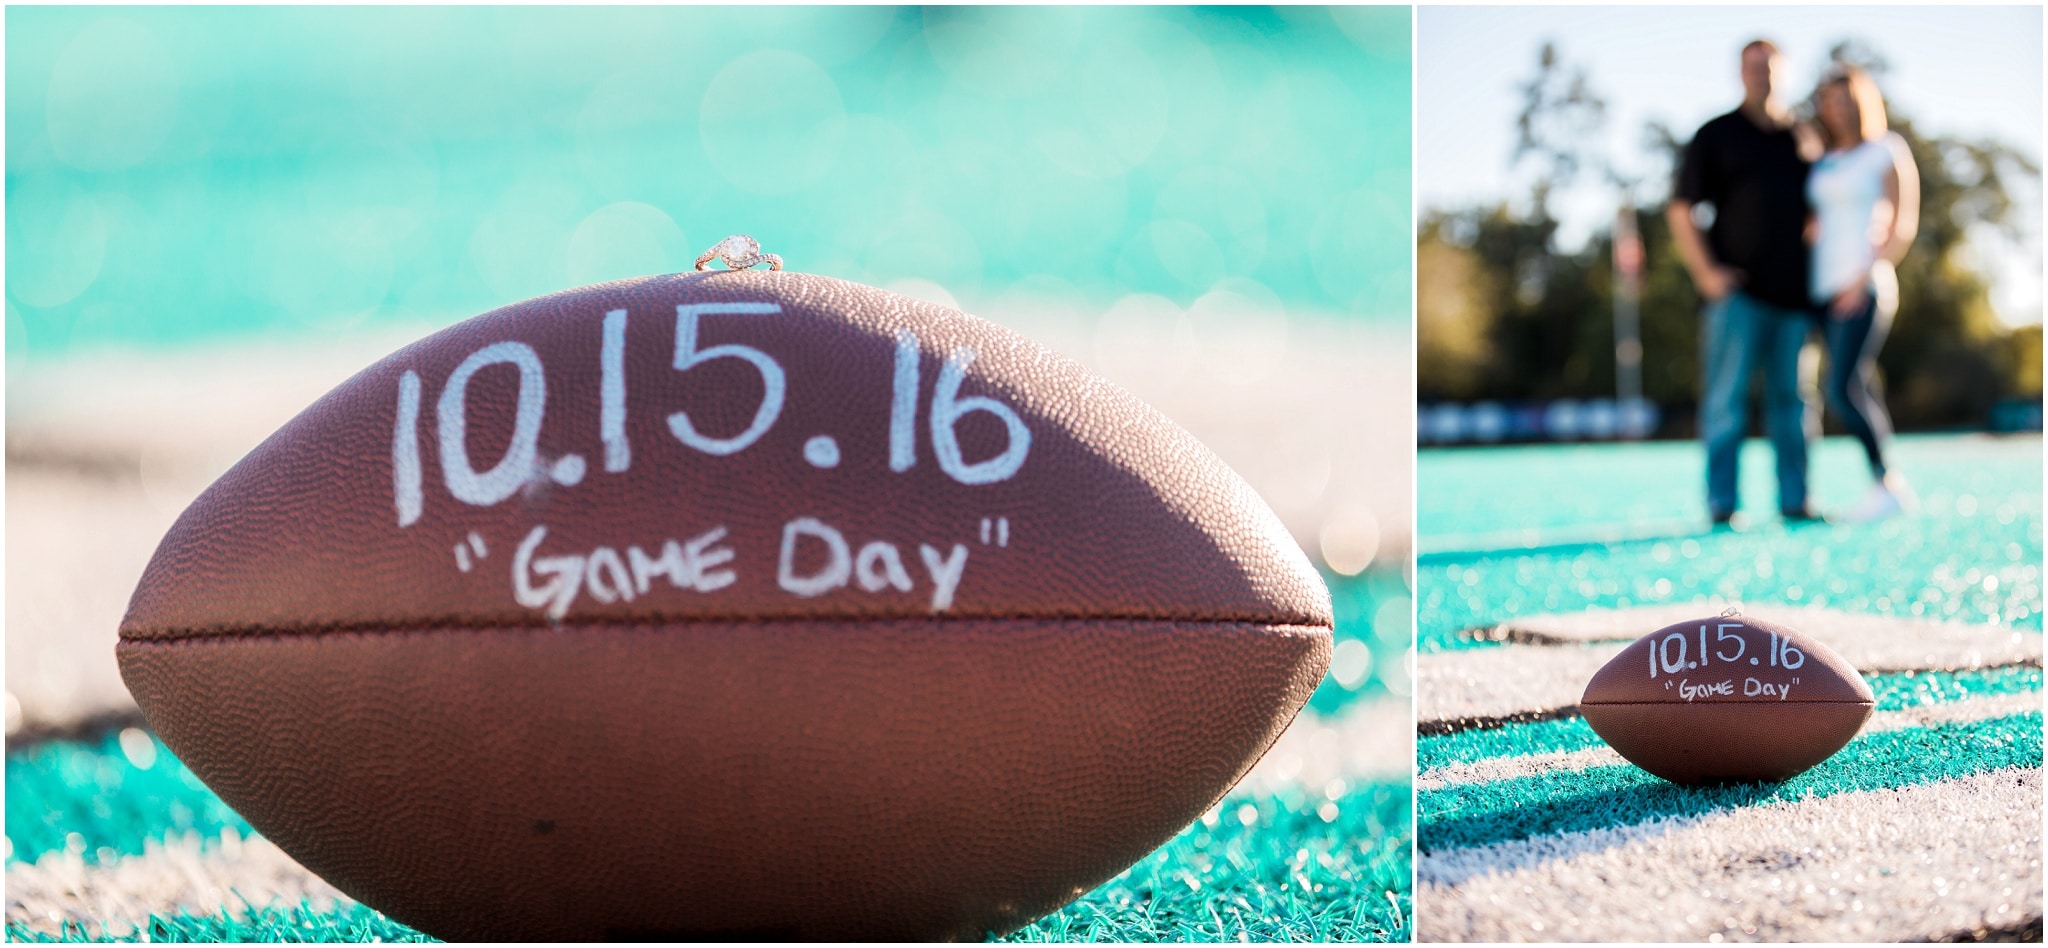 Save the date football pictures on the feild grass at Coastal Carolina University, Save the Date Football, Dana and Bradley, Myrtle Beach Engagement Photography Session 5, Coastal Carolina University, www.onelifephoto.net